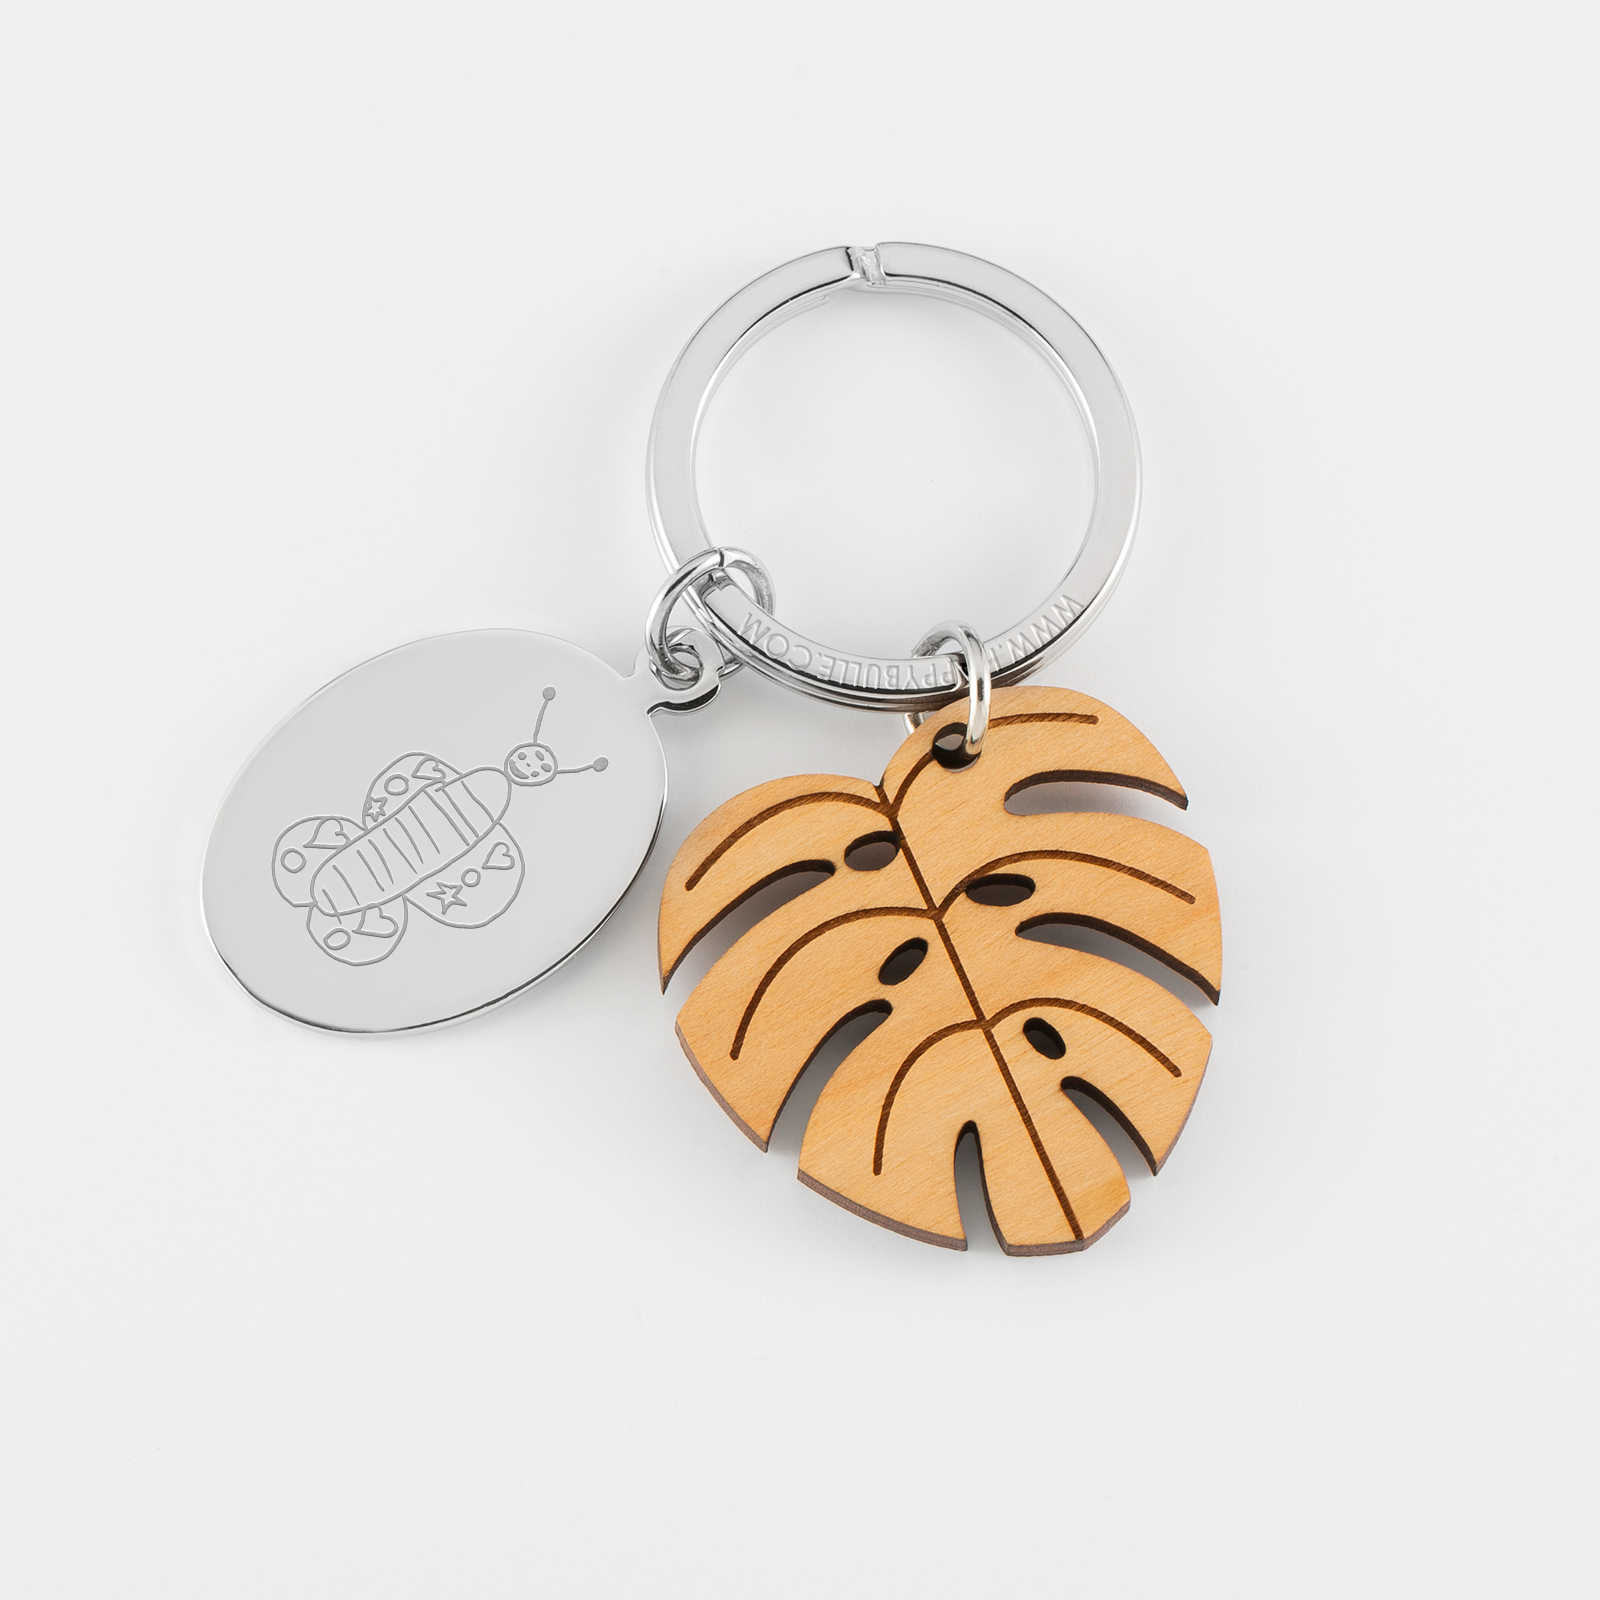 Personalised engraved oval steel medallion and wooden tropical leaf charm keyring - sketch